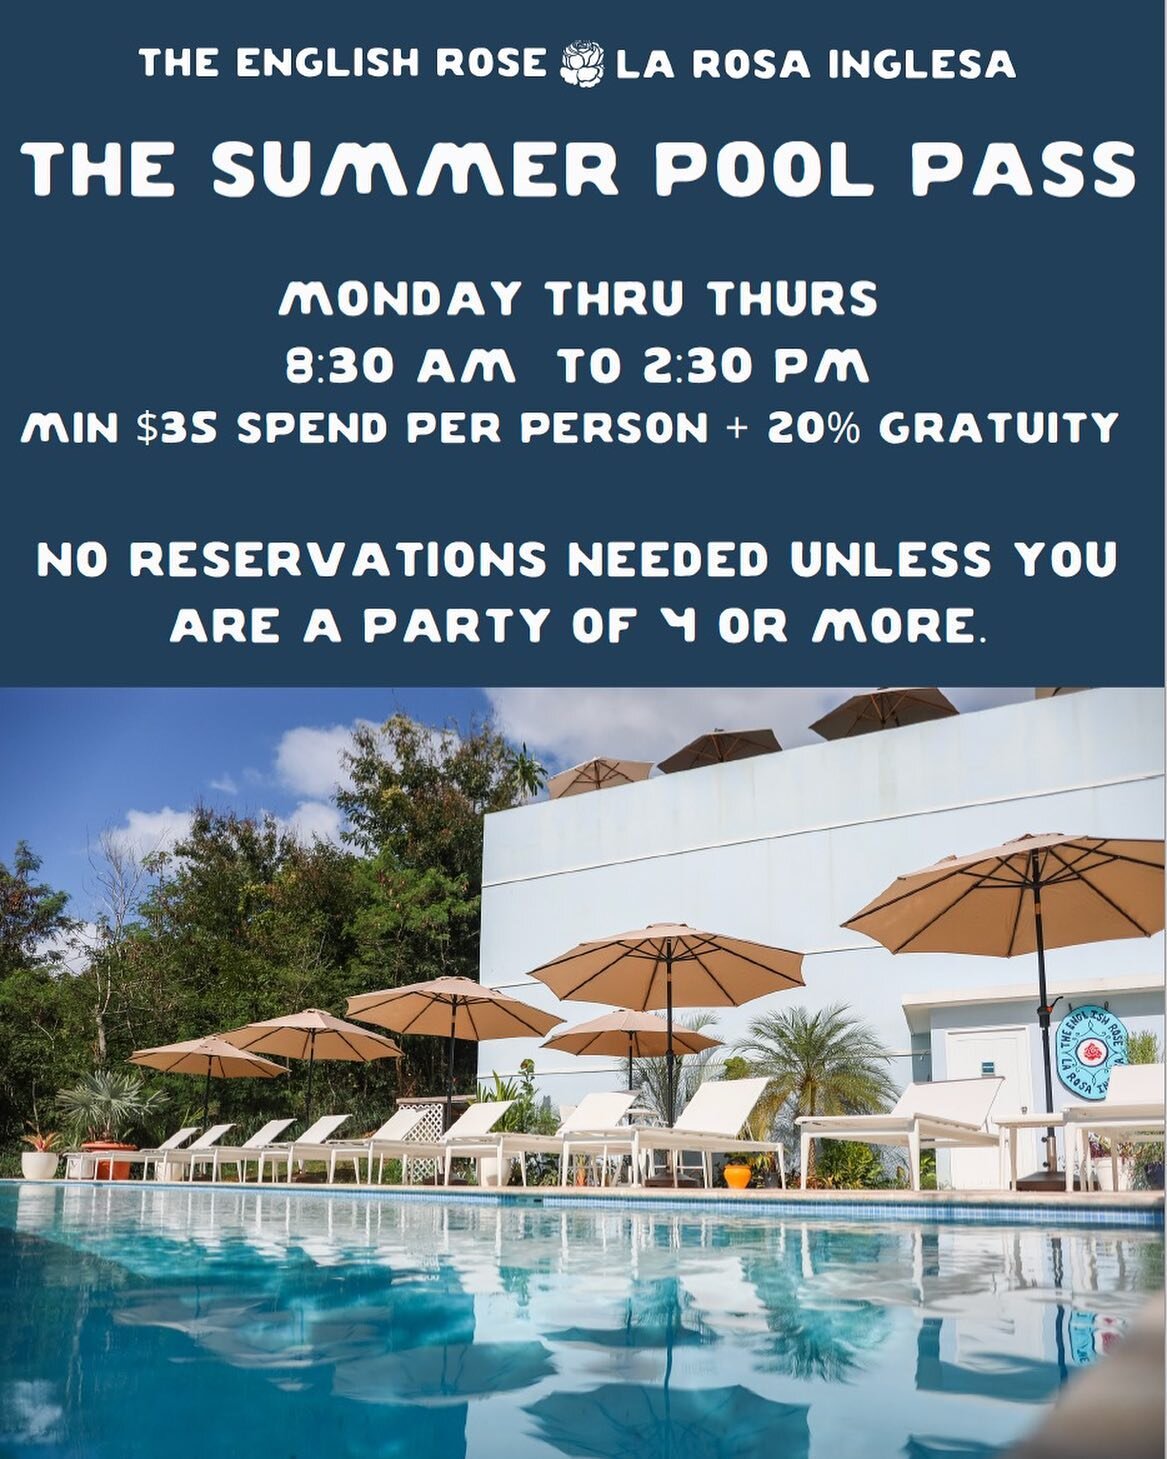 THE SUMMER POOL PASS: M - T 8:30 to 2:30. Min Spend: $35 per person + 20% Gratuity. No Reservations UNLESS you are a party of 4 or more.